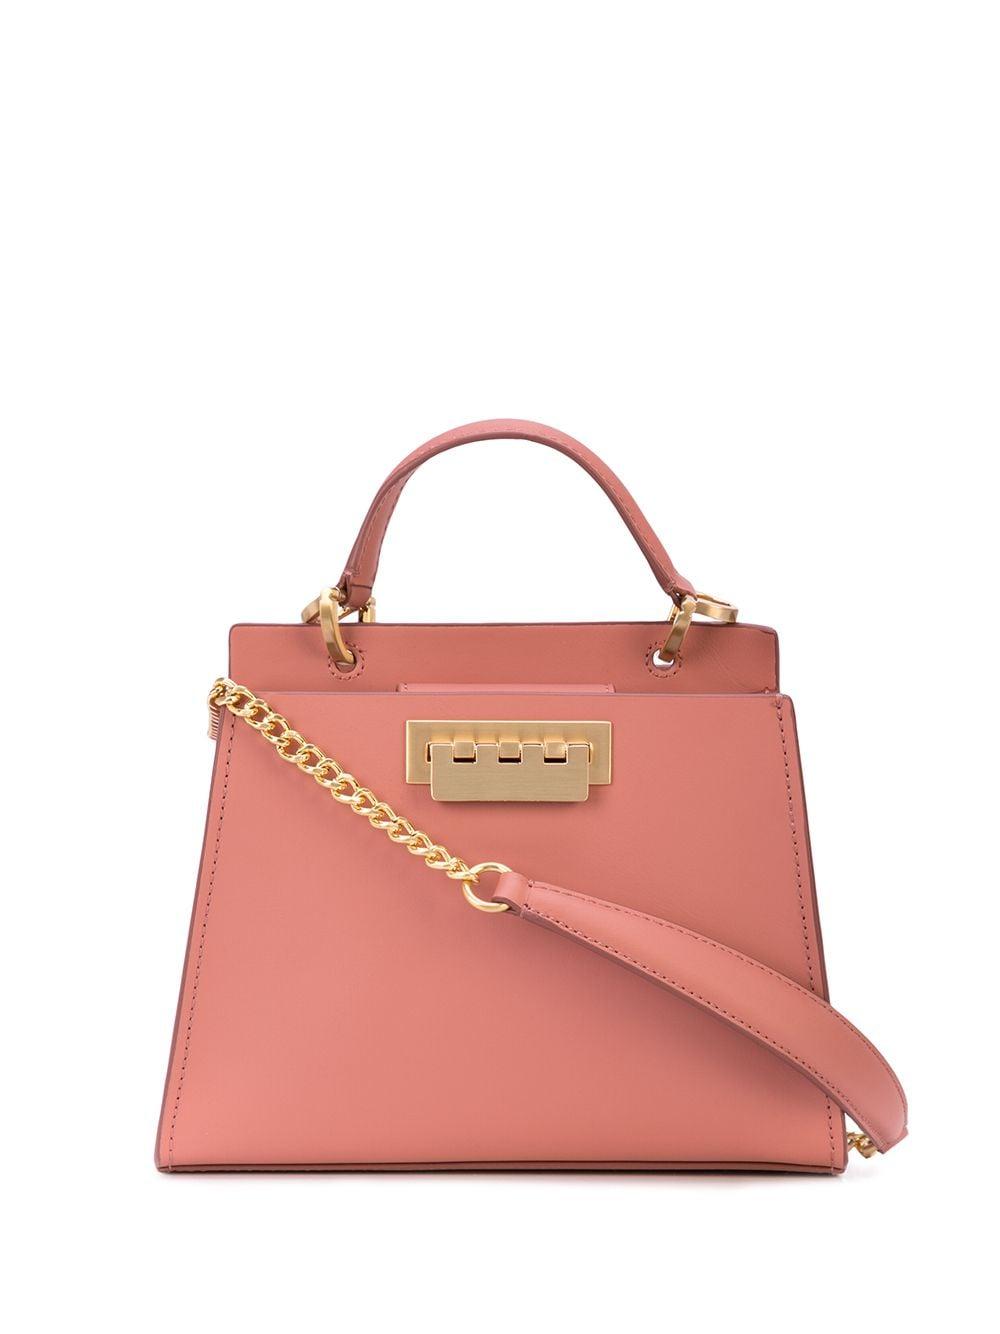 Zac Zac Posen Leather Earthette Double Compartment Bag in Pink - Lyst